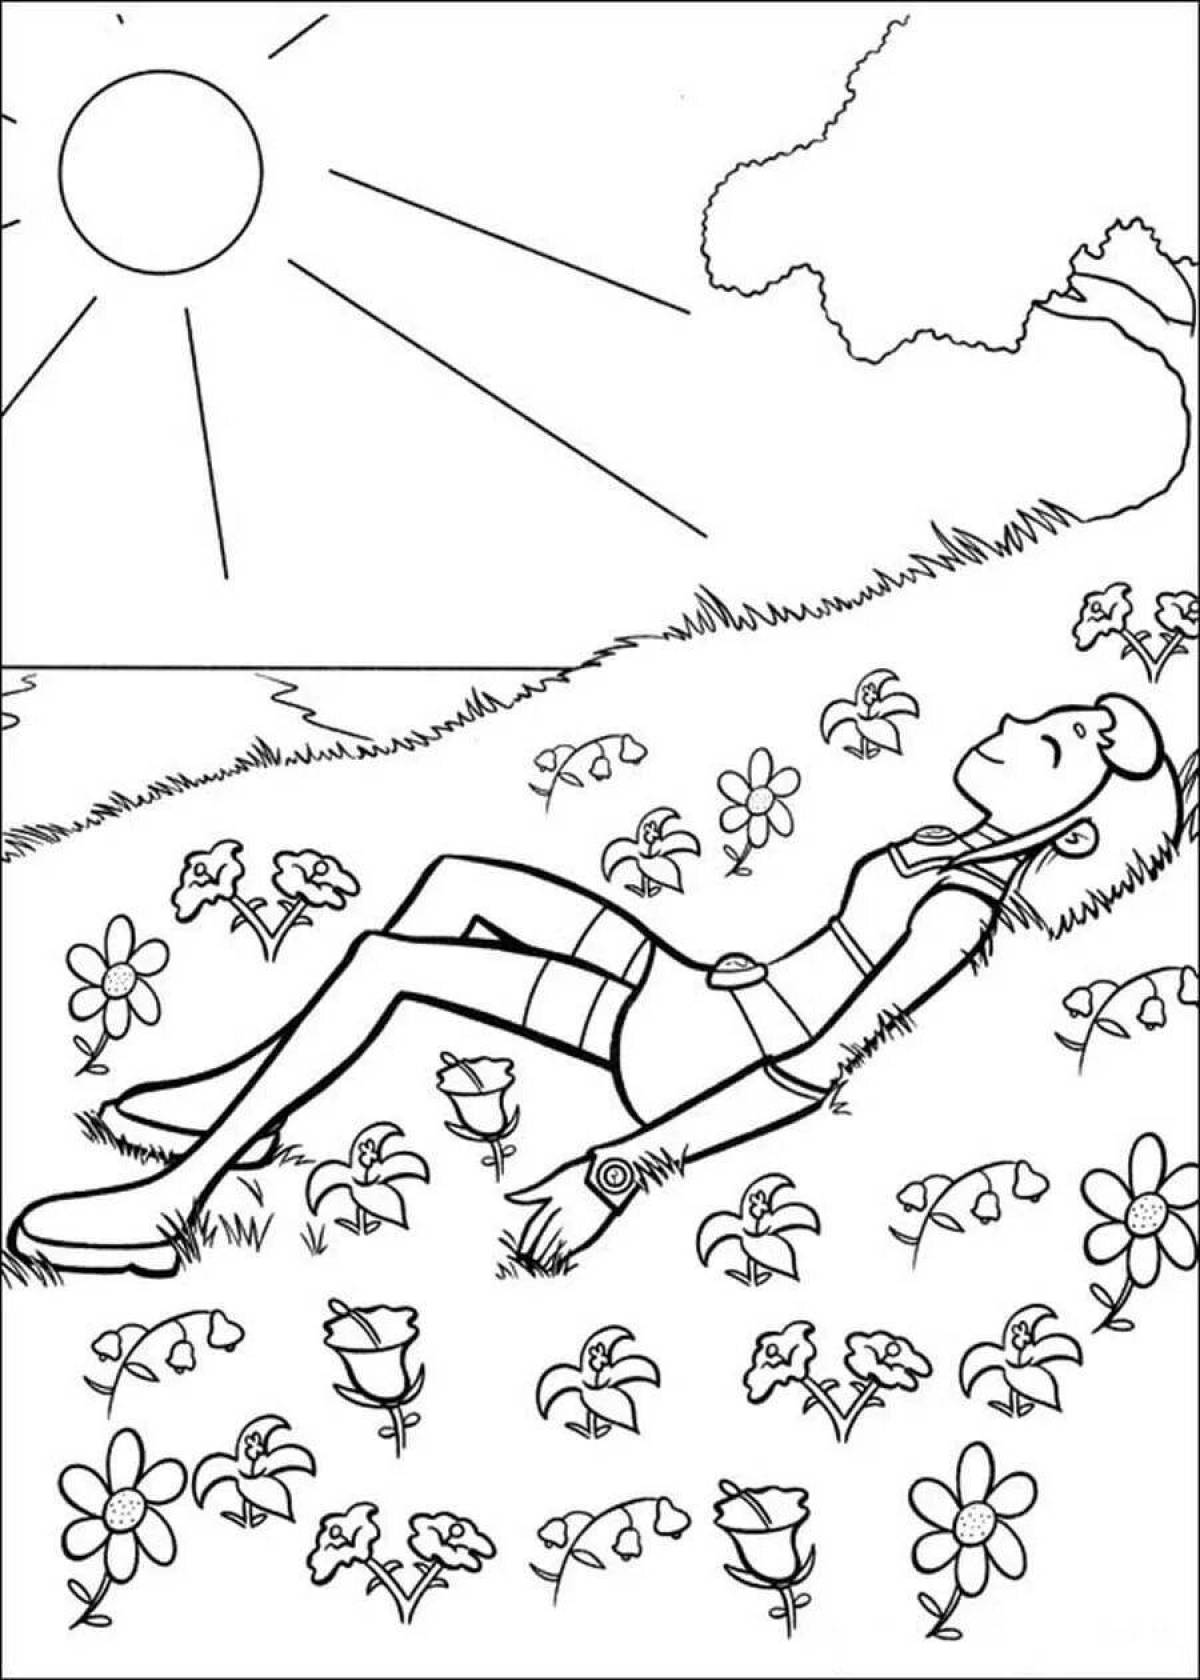 Colored meadow coloring for children